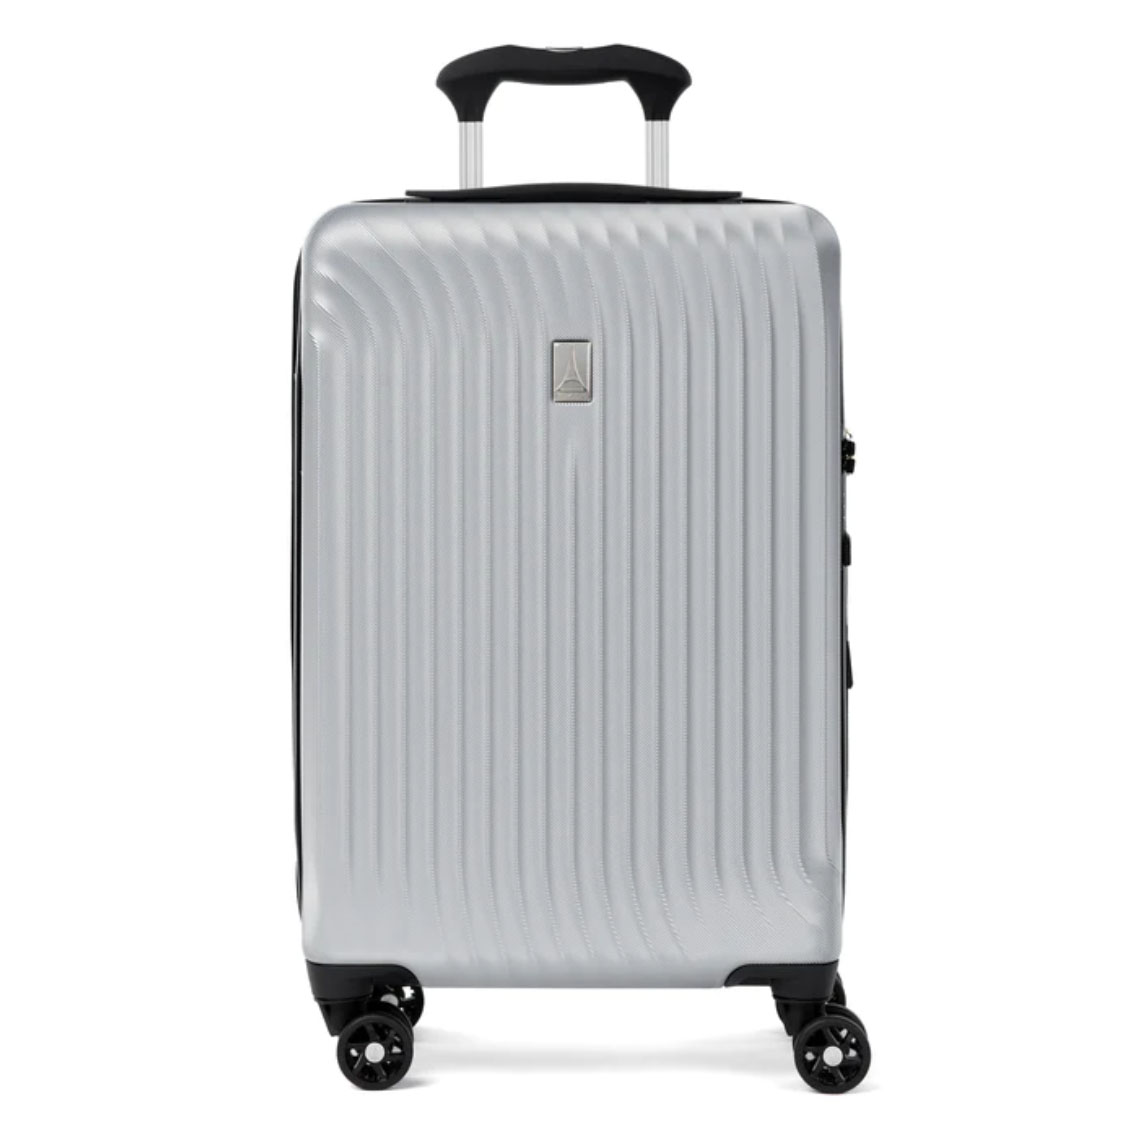 Silver hardside carry-on luggage